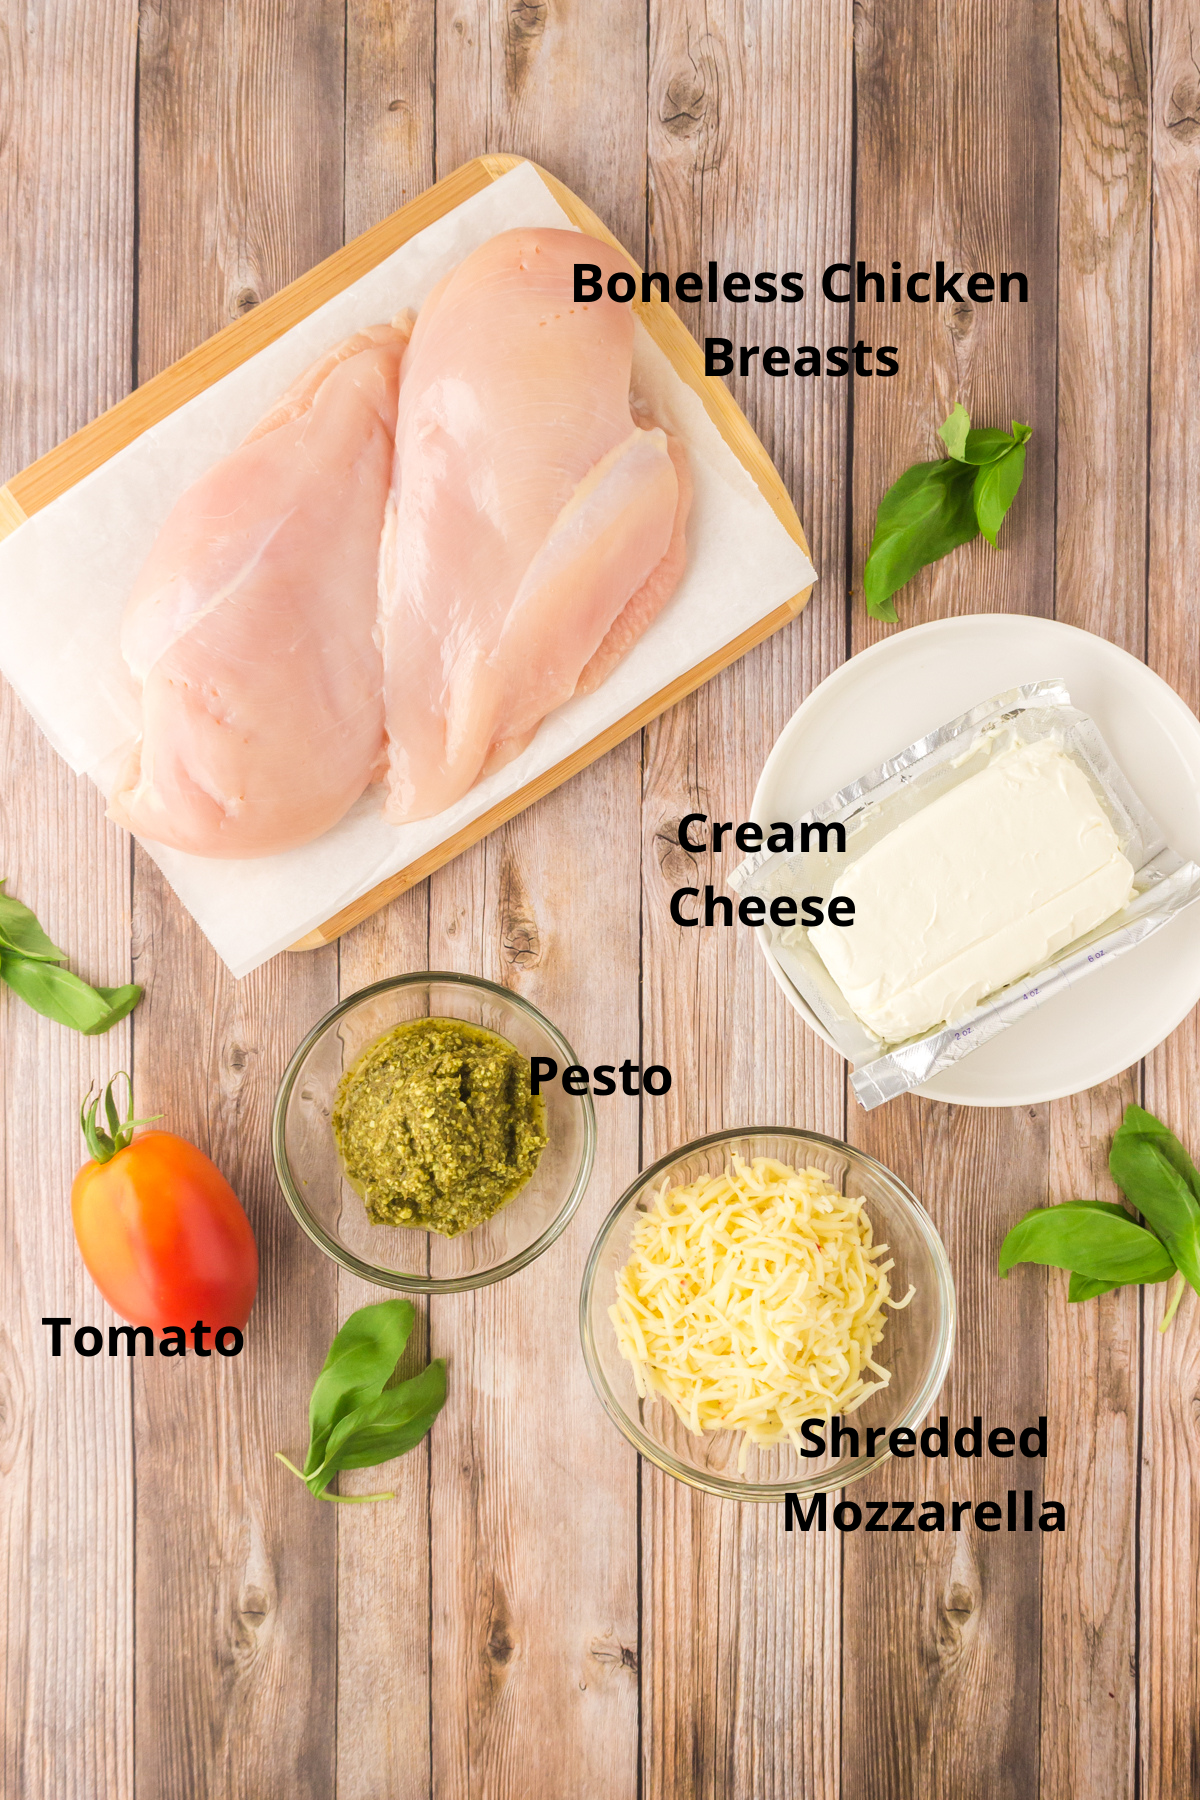 ingredients for this pesto chicken bake